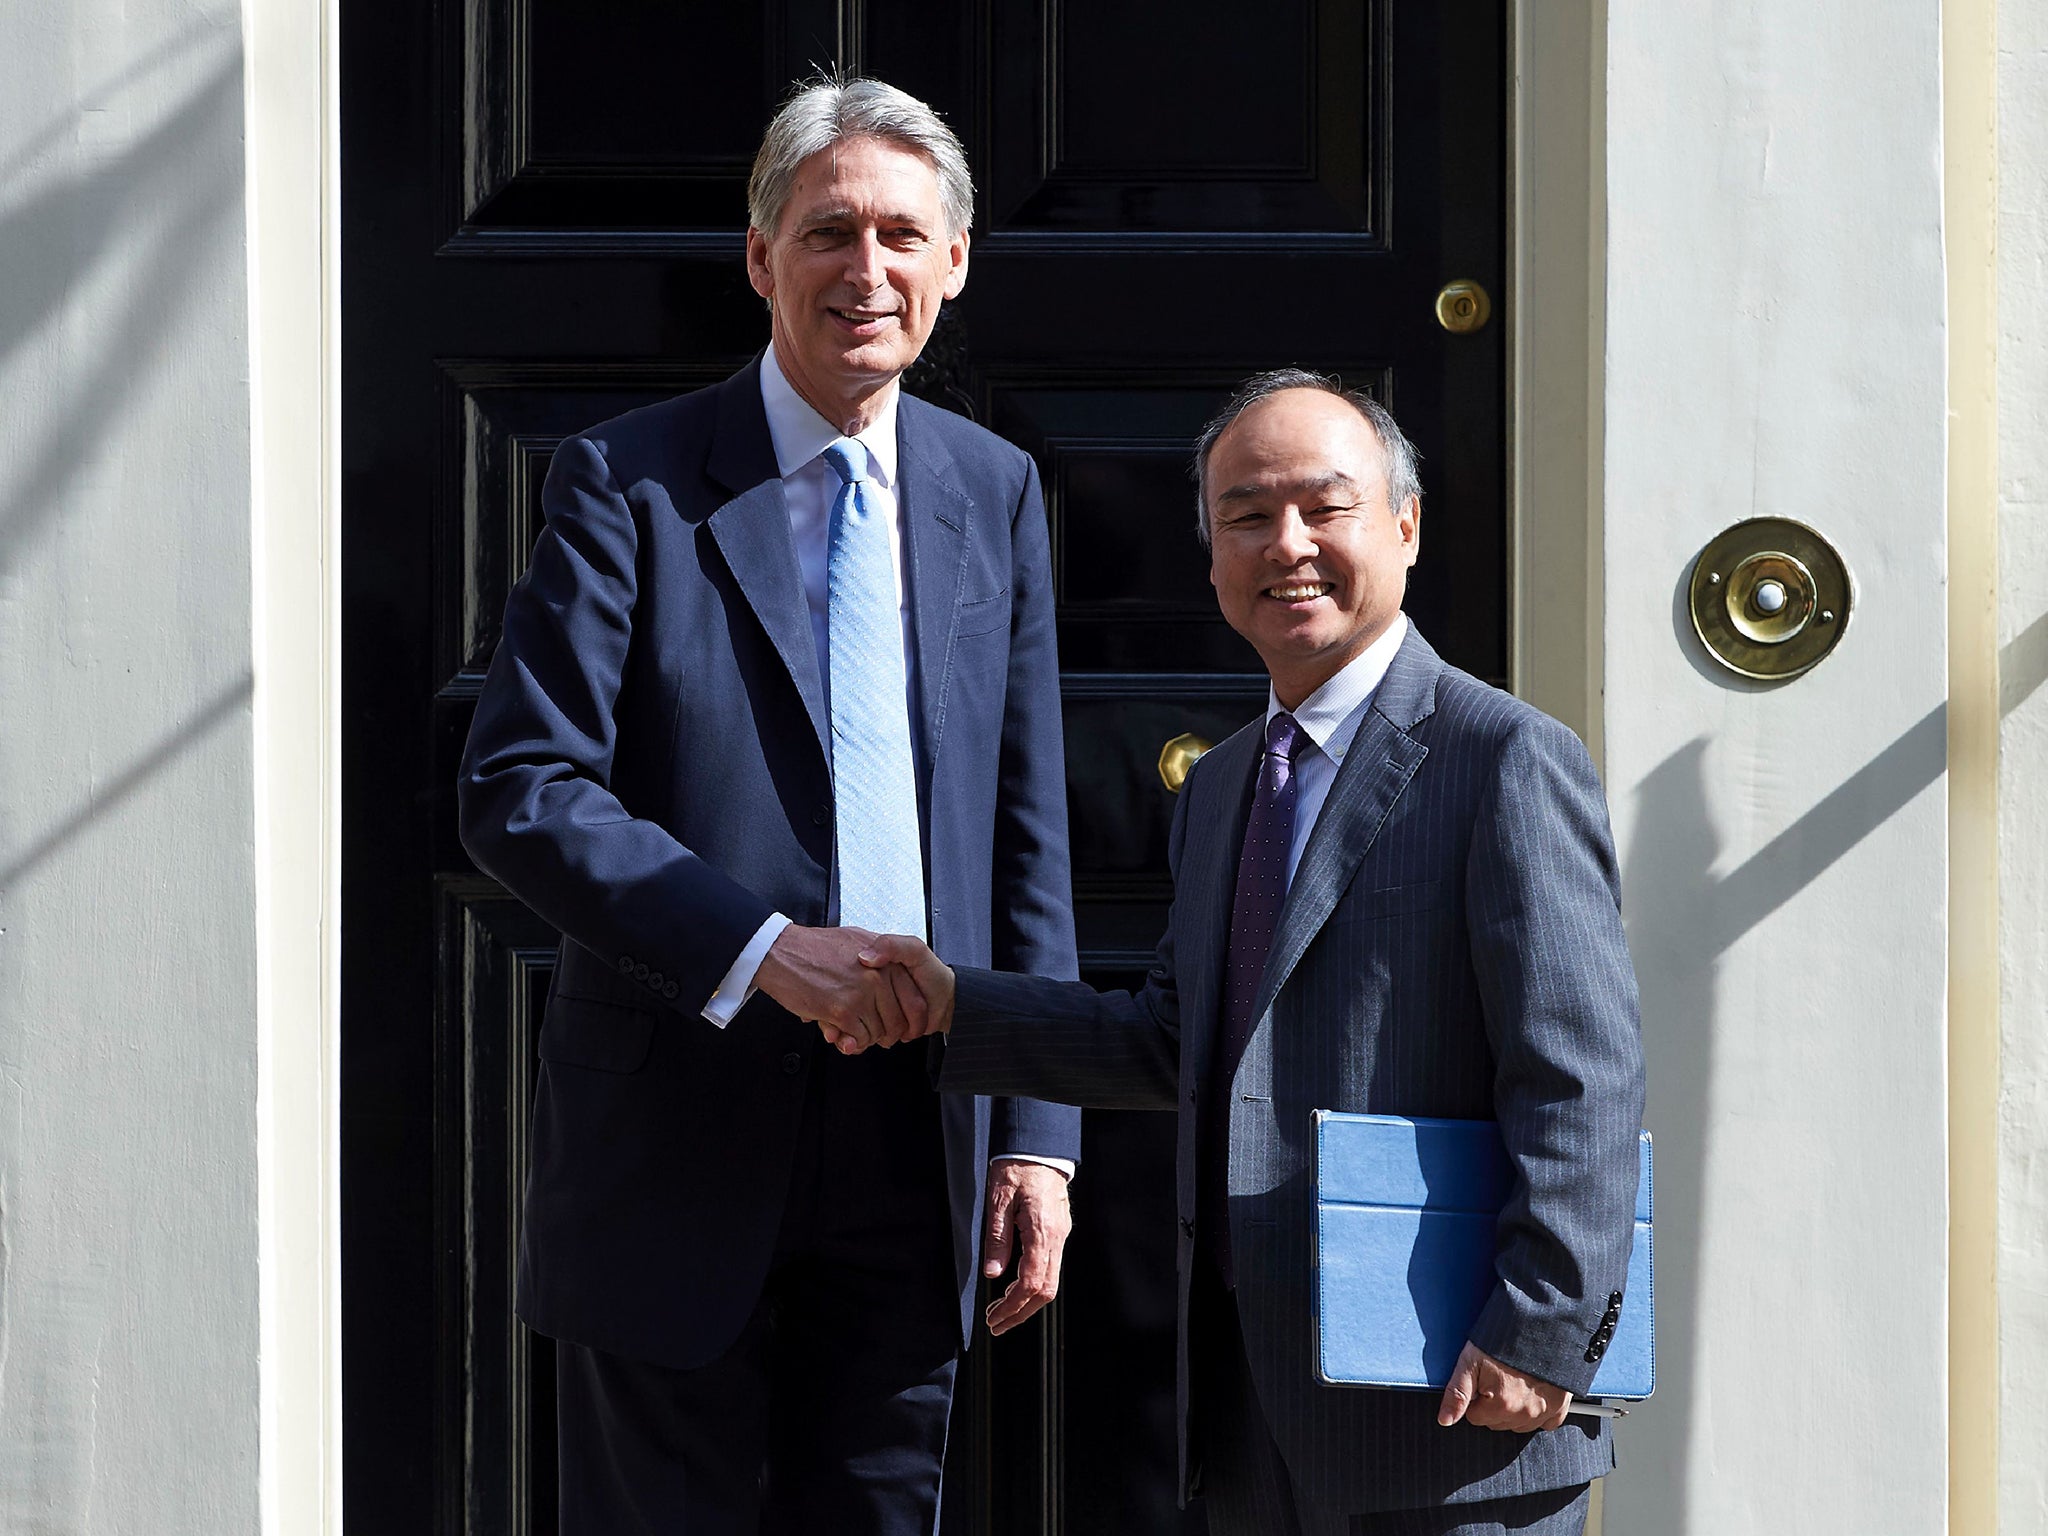 British Finance Minister Philip Hammond (L) greets Masayoshi Son, CEO of Japanese mobile giant SoftBank, the company that has agreed a takeover of ARM